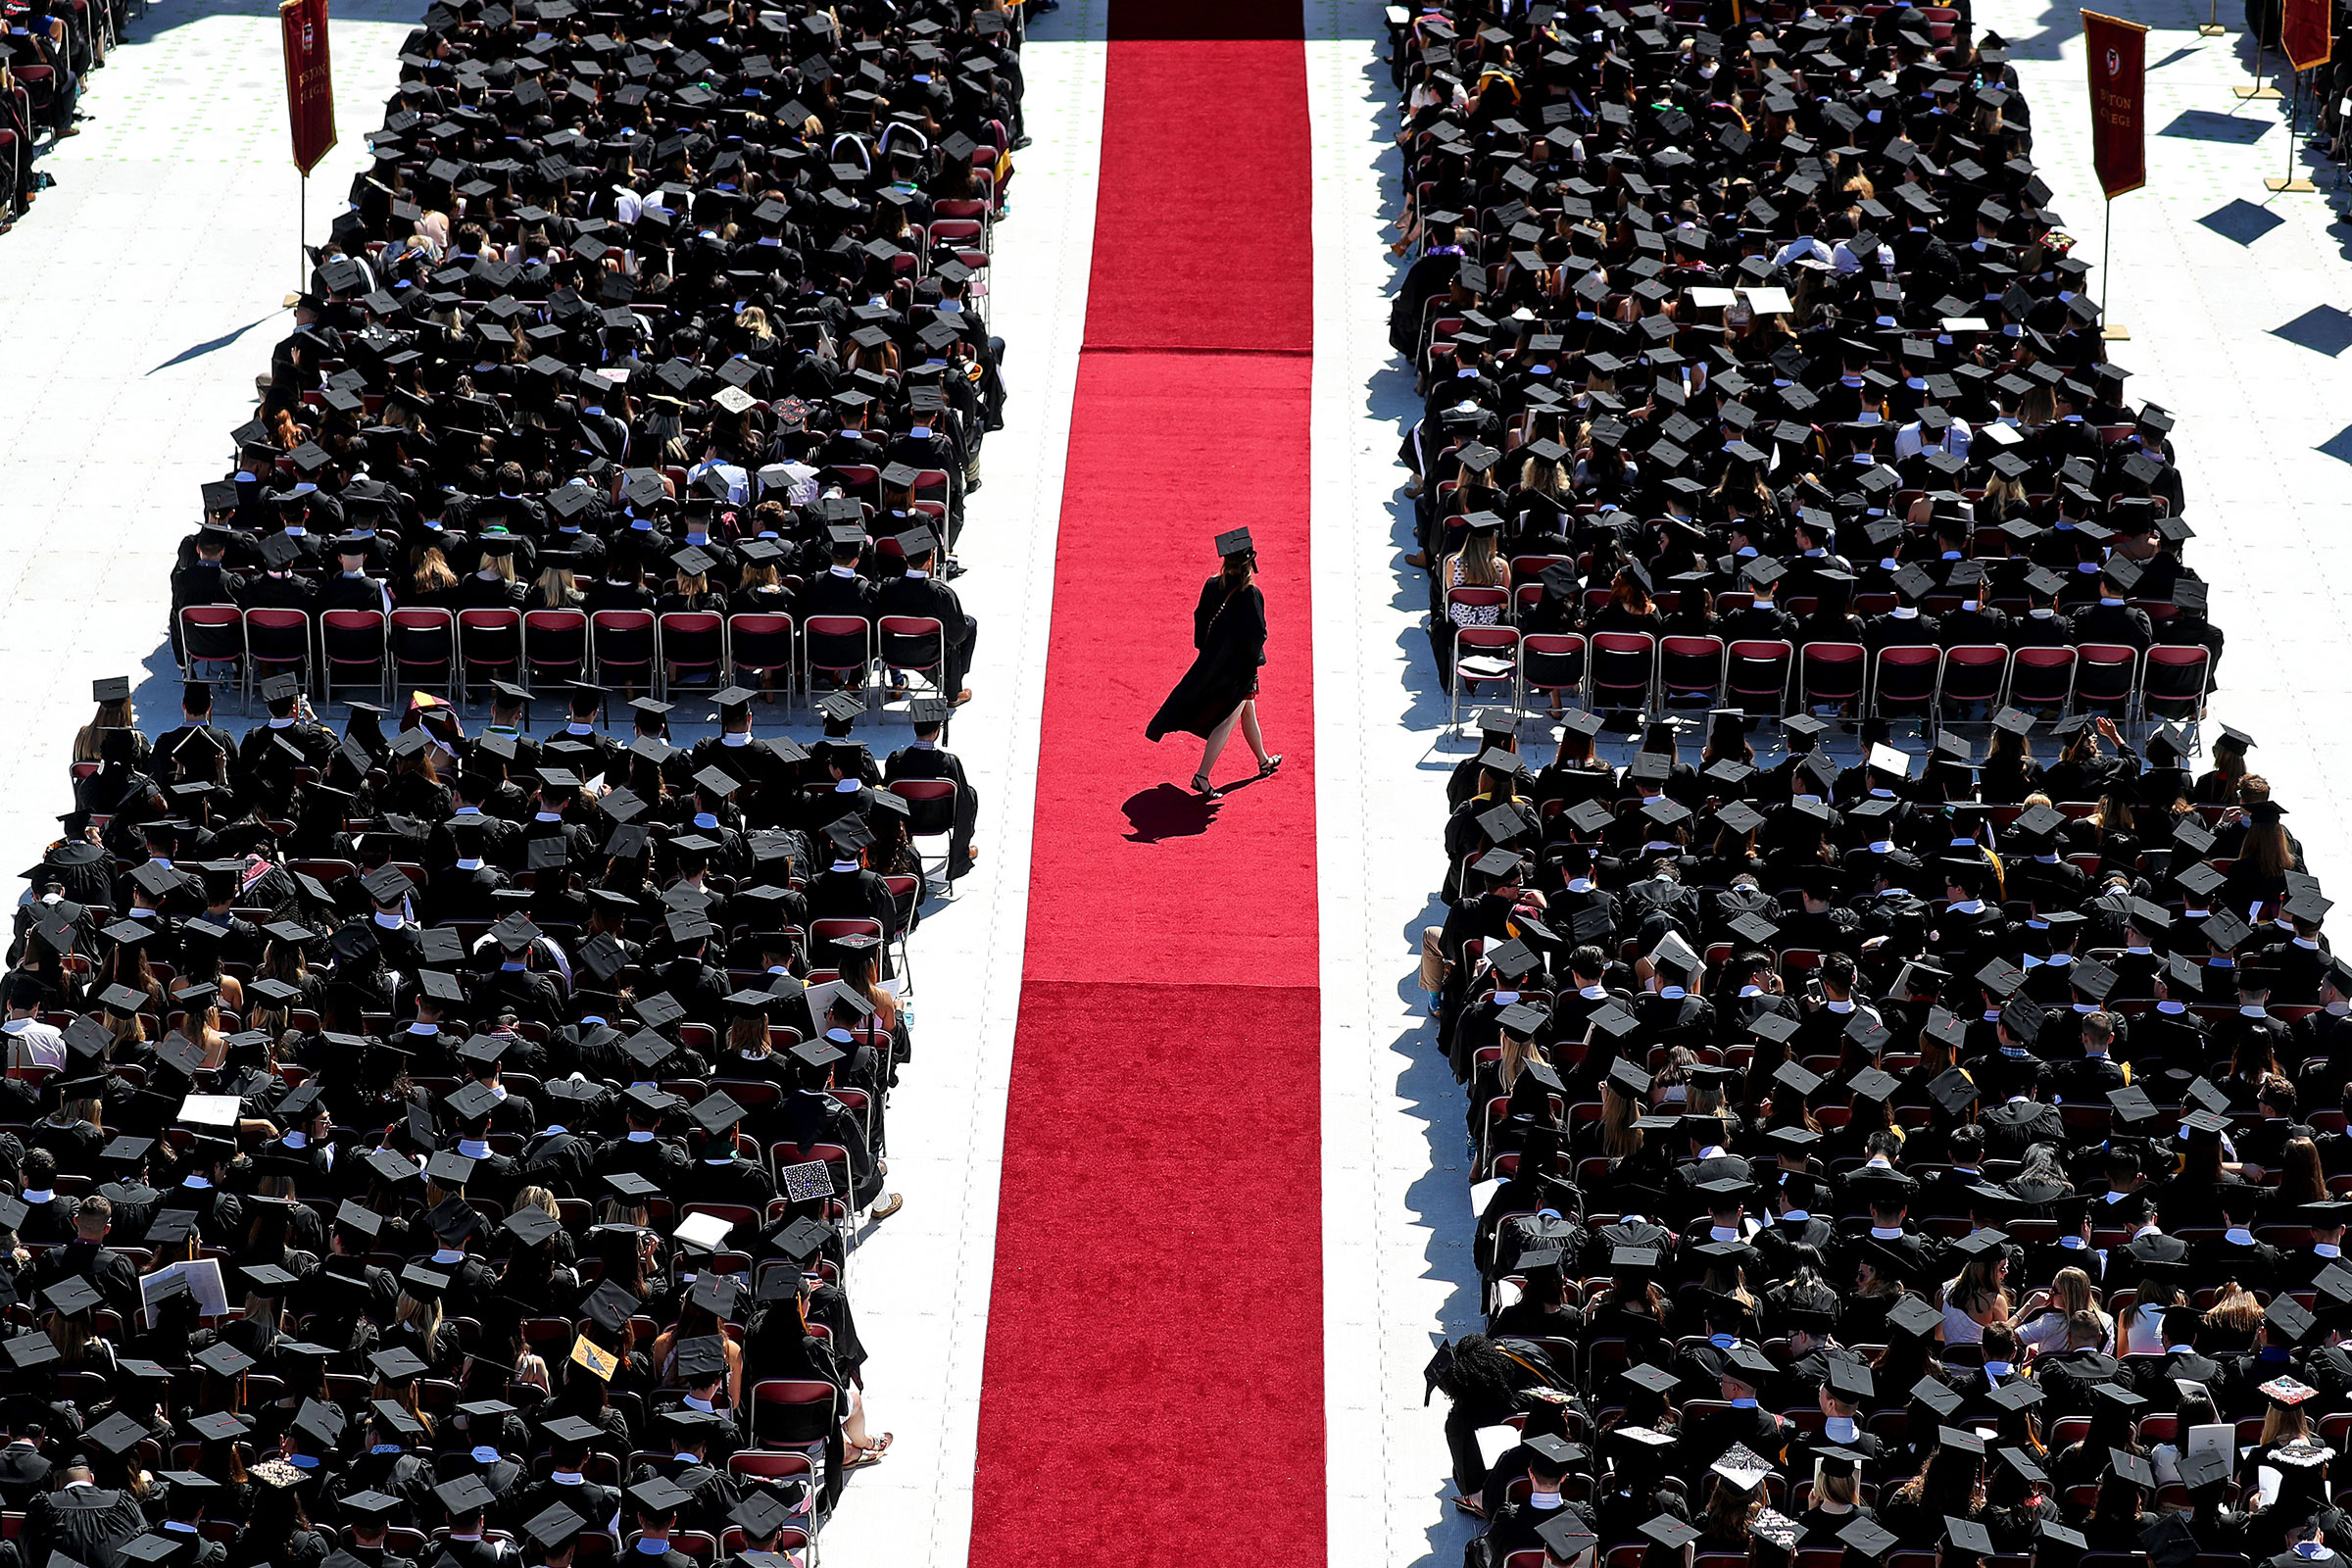 A graduate crosses the red carpet at Boston College’s commencement on May 21, 2018 (David L. Ryan—The Boston Globe/Getty Images)